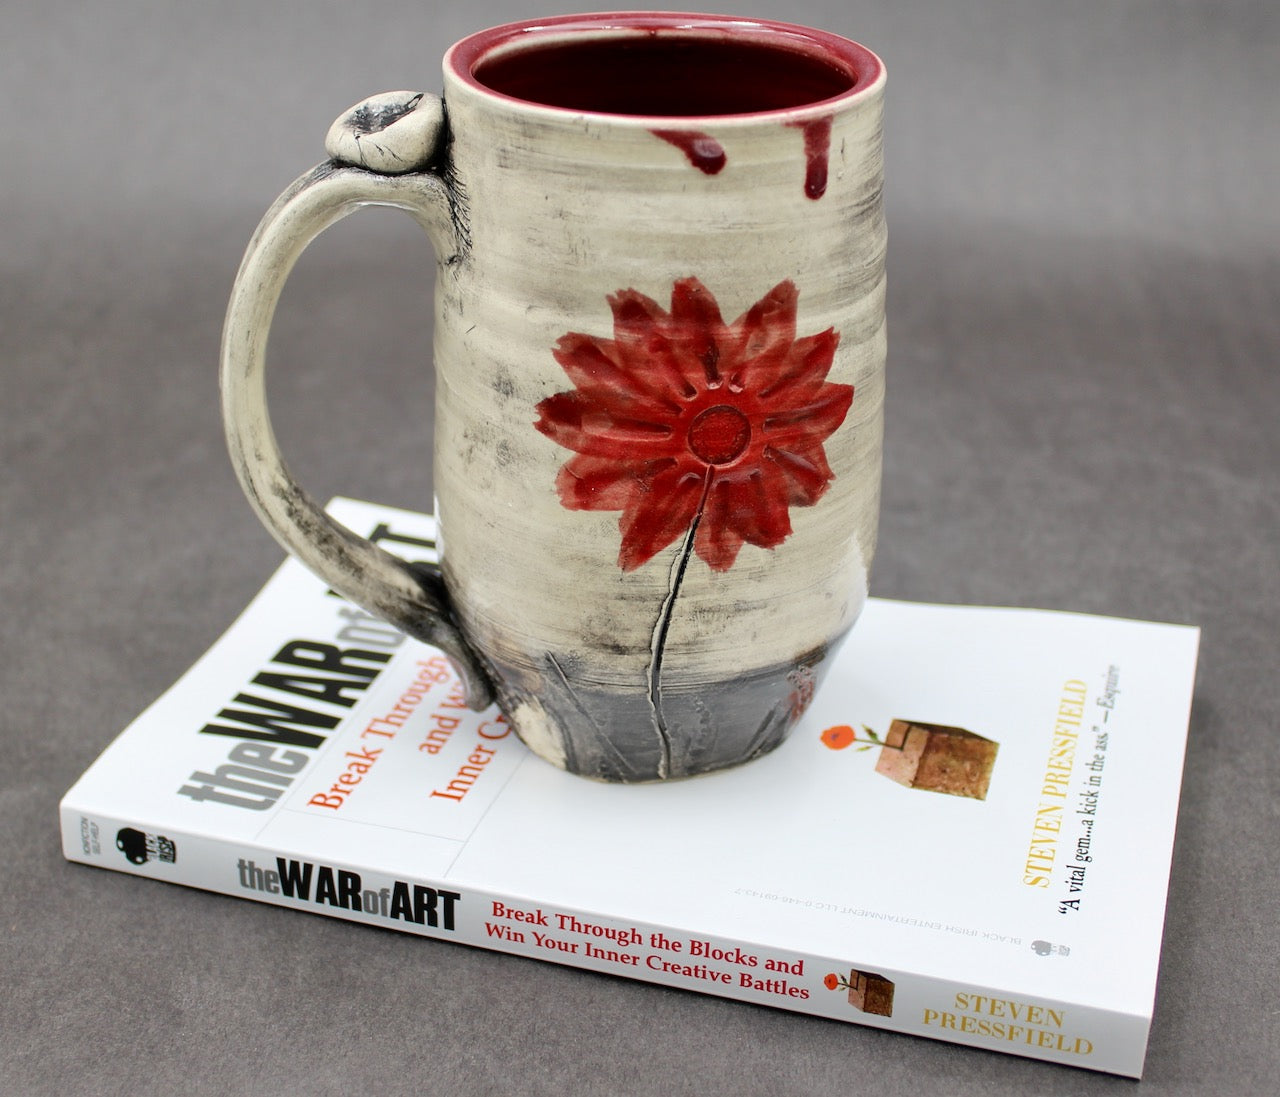 One Bullet Flower Mug and Autographed Book, "The War of Art" by Steven Pressfield (SK7791)